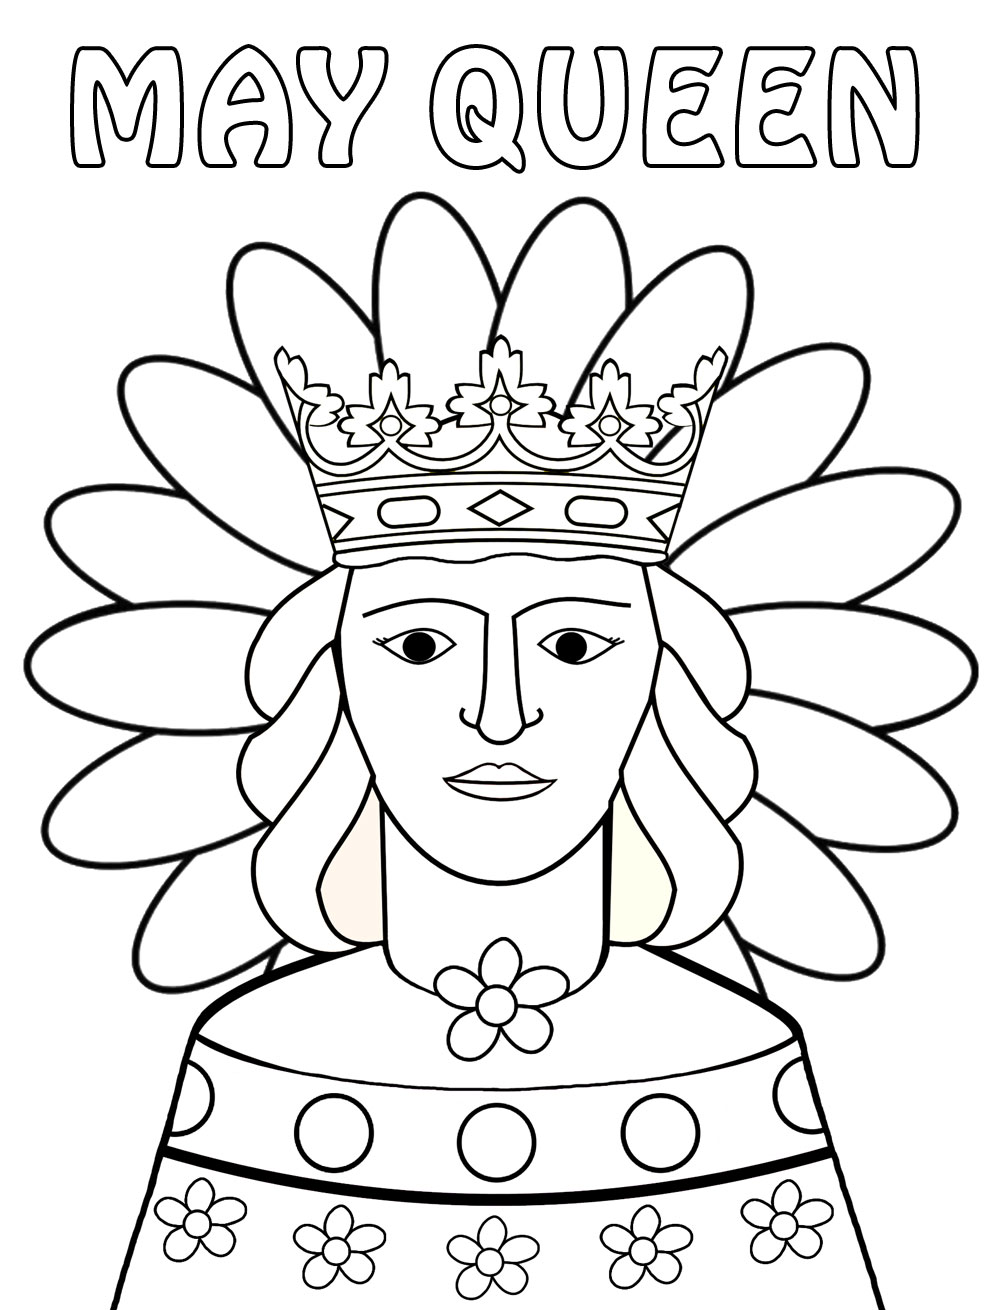 Printable colouring page of a May Queen